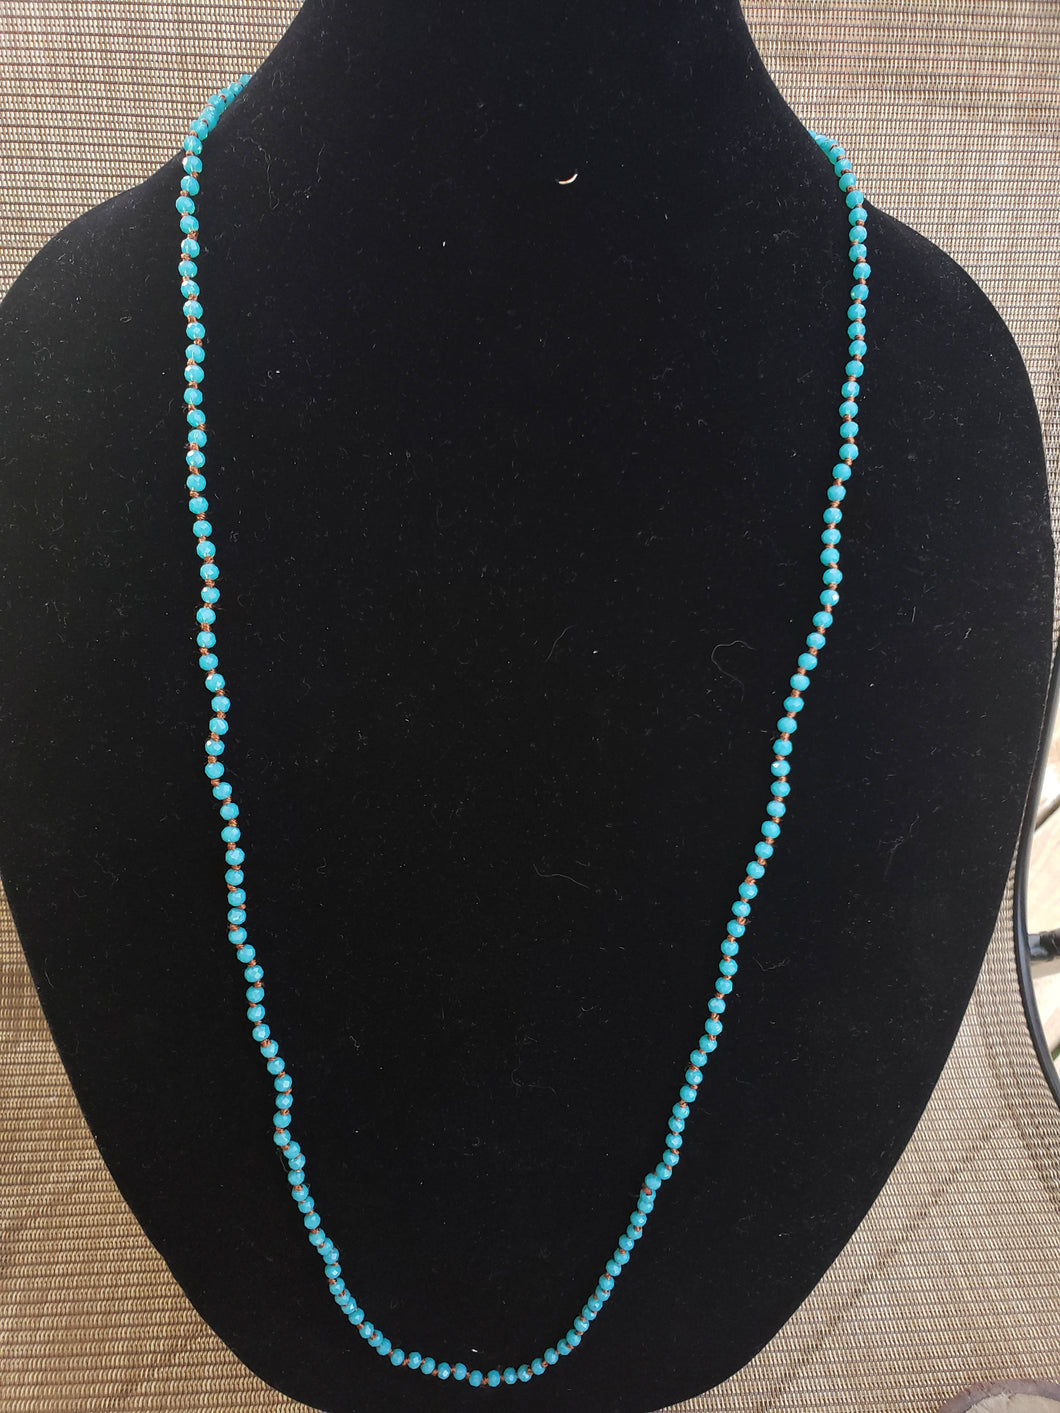 Aqua Knotted Necklace-N6-36-0006